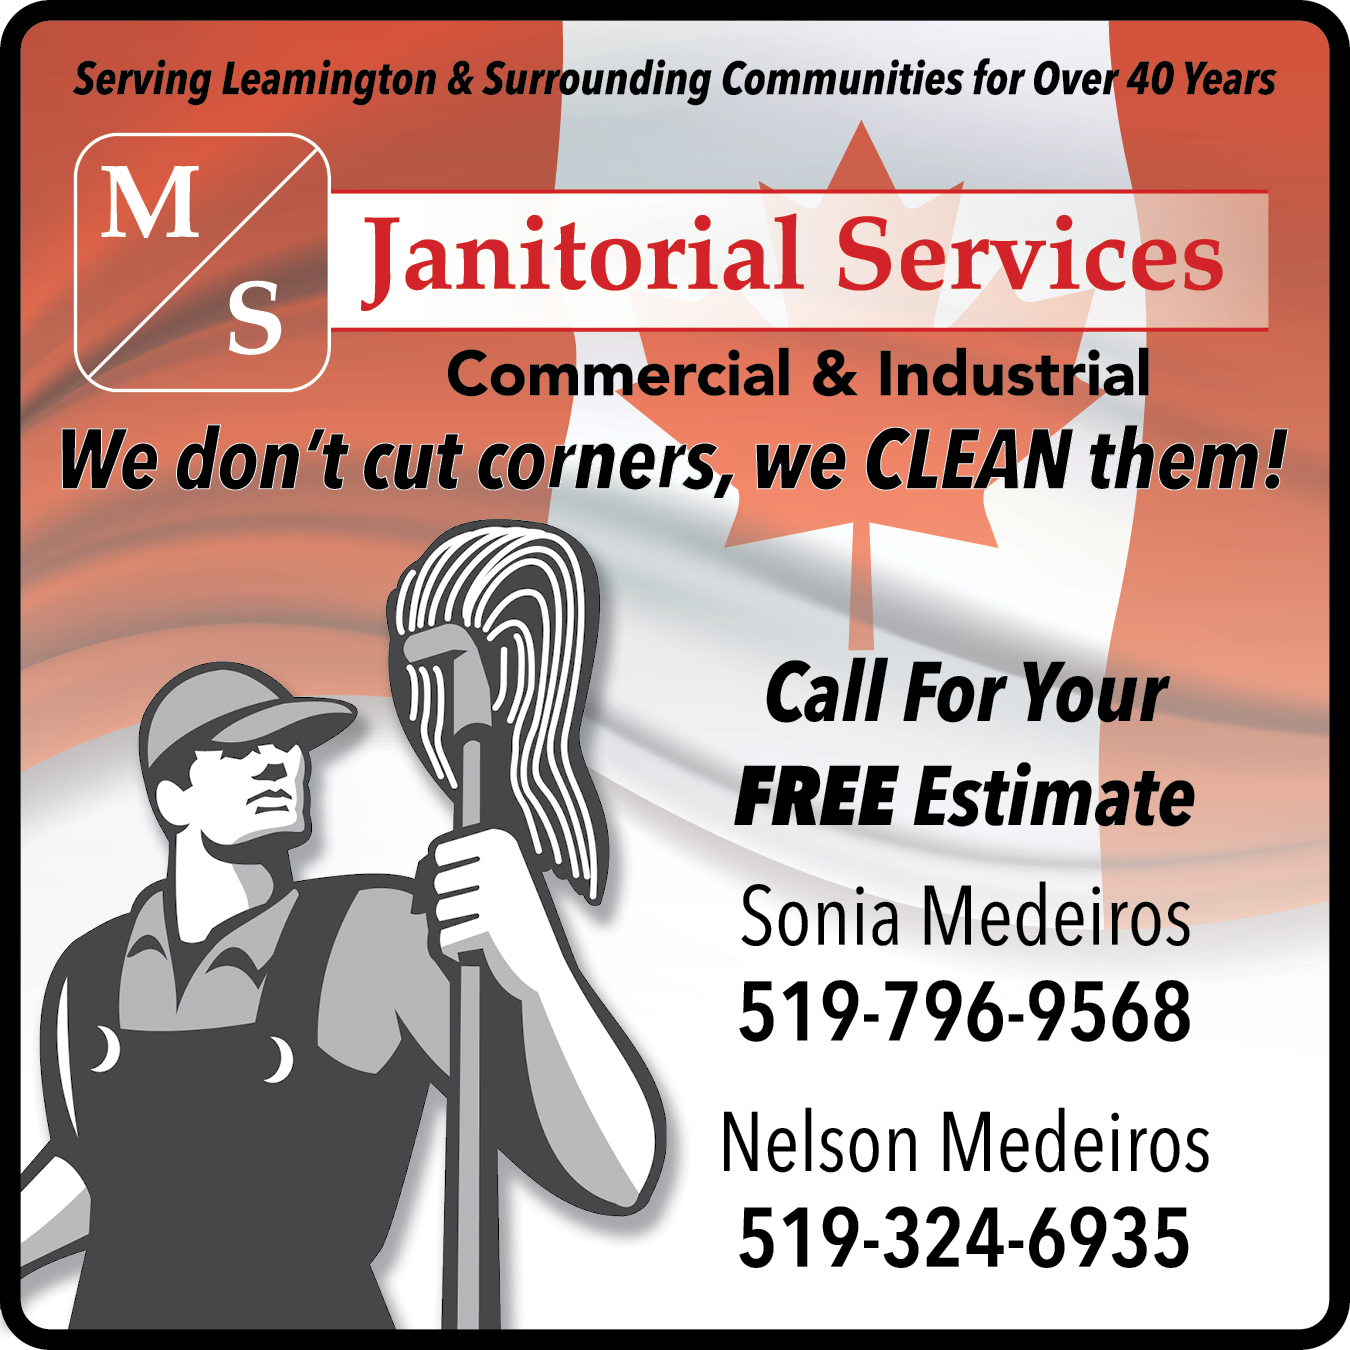 M S Janitorial Services